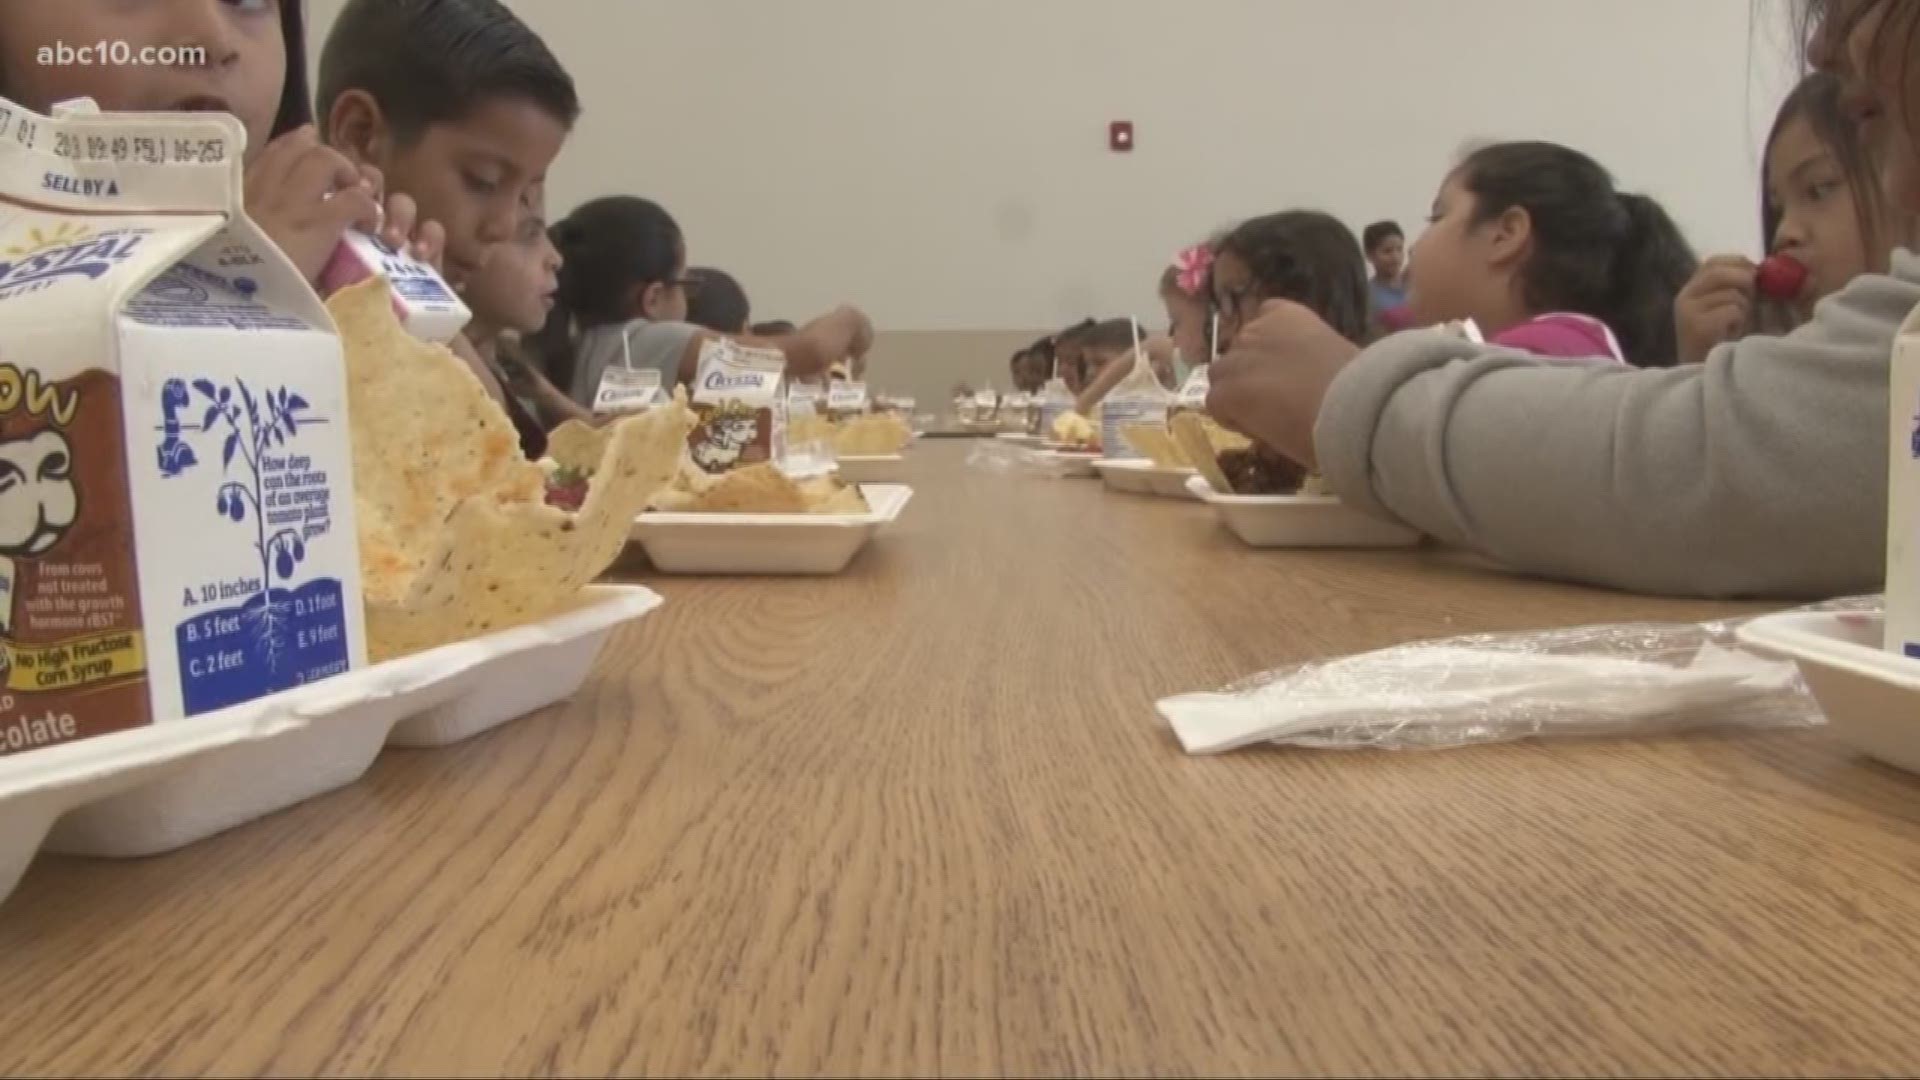 Parents in most Modesto school districts no longer have to pay for breakfast and lunch due to a beneficial federal program.